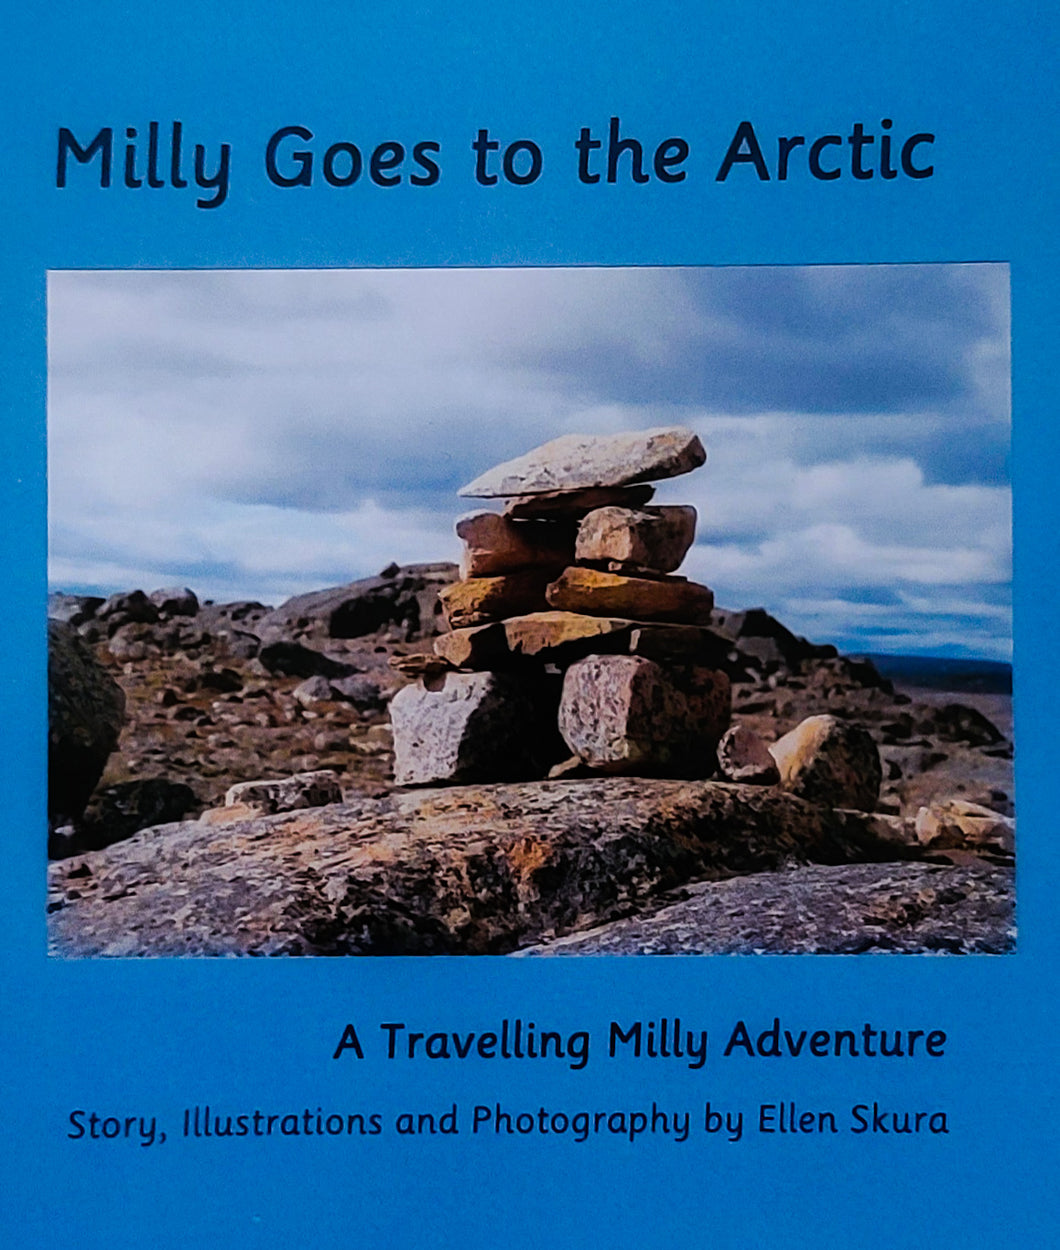 Milly Goes to the Arctic